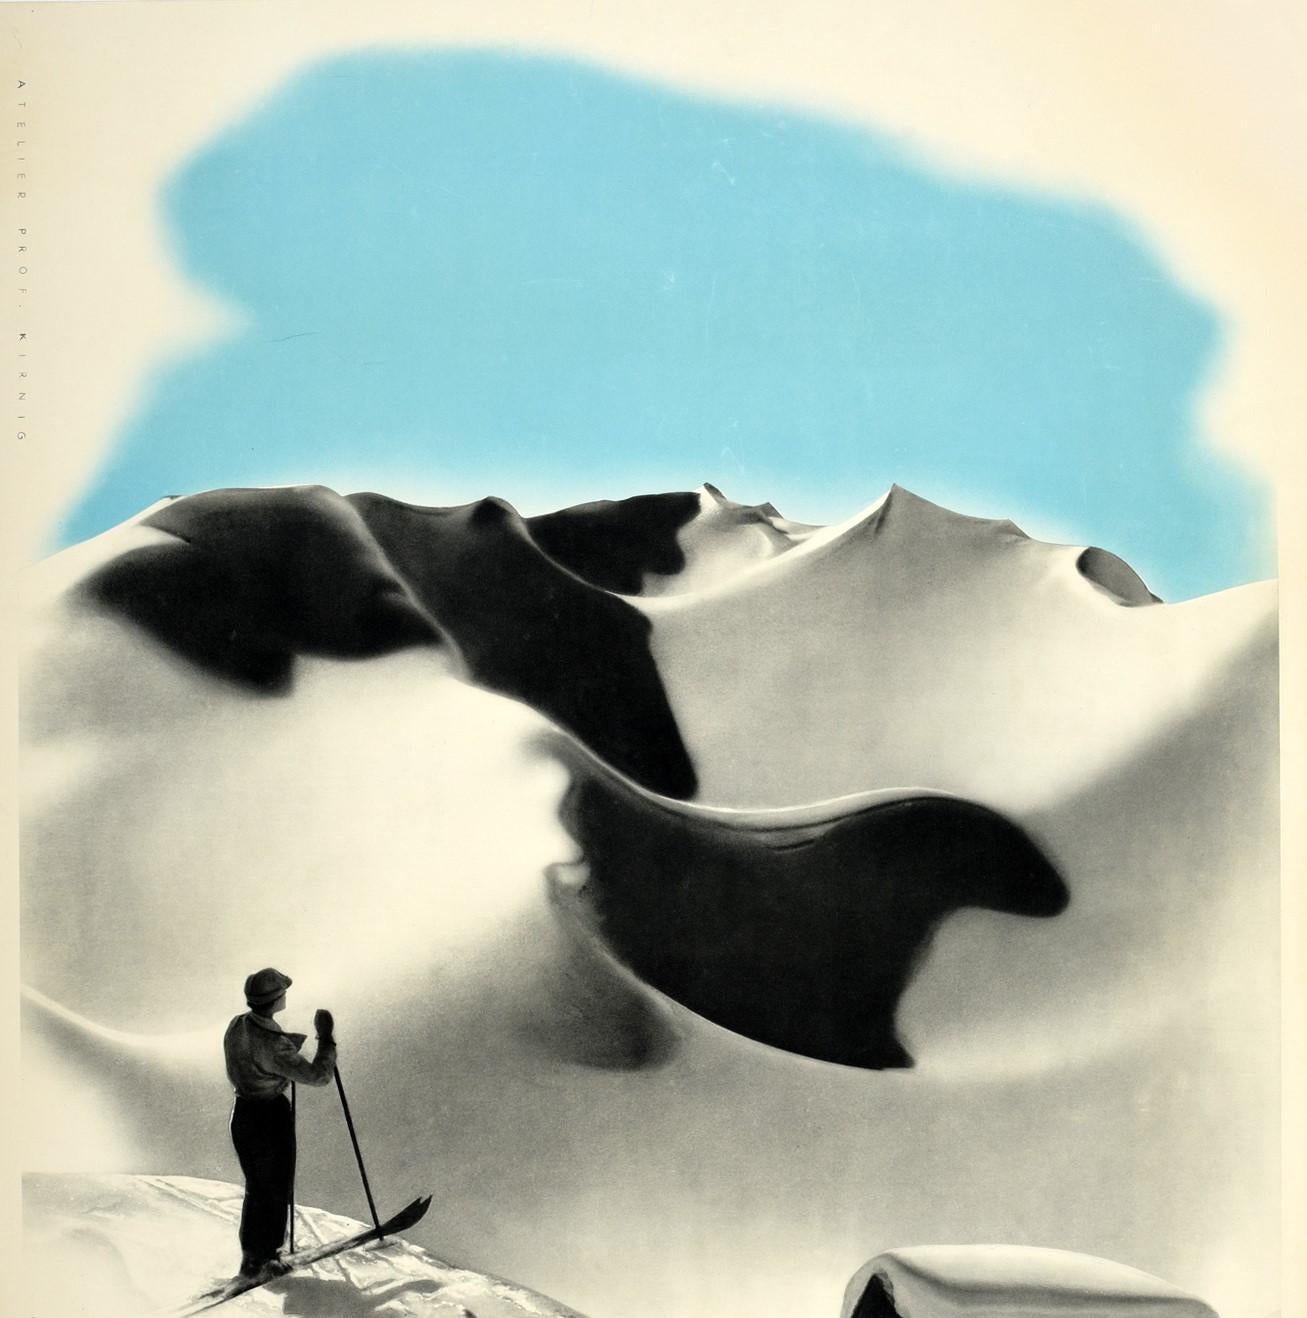 Original vintage winter sport skiing poster for Austria featuring a scenic view in black and white by Atelier Prof. Kirnig (Paul Kirnig; 1891-1955) of a lady standing on skis at the top of a slope and leaning on her ski poles, looking out over a